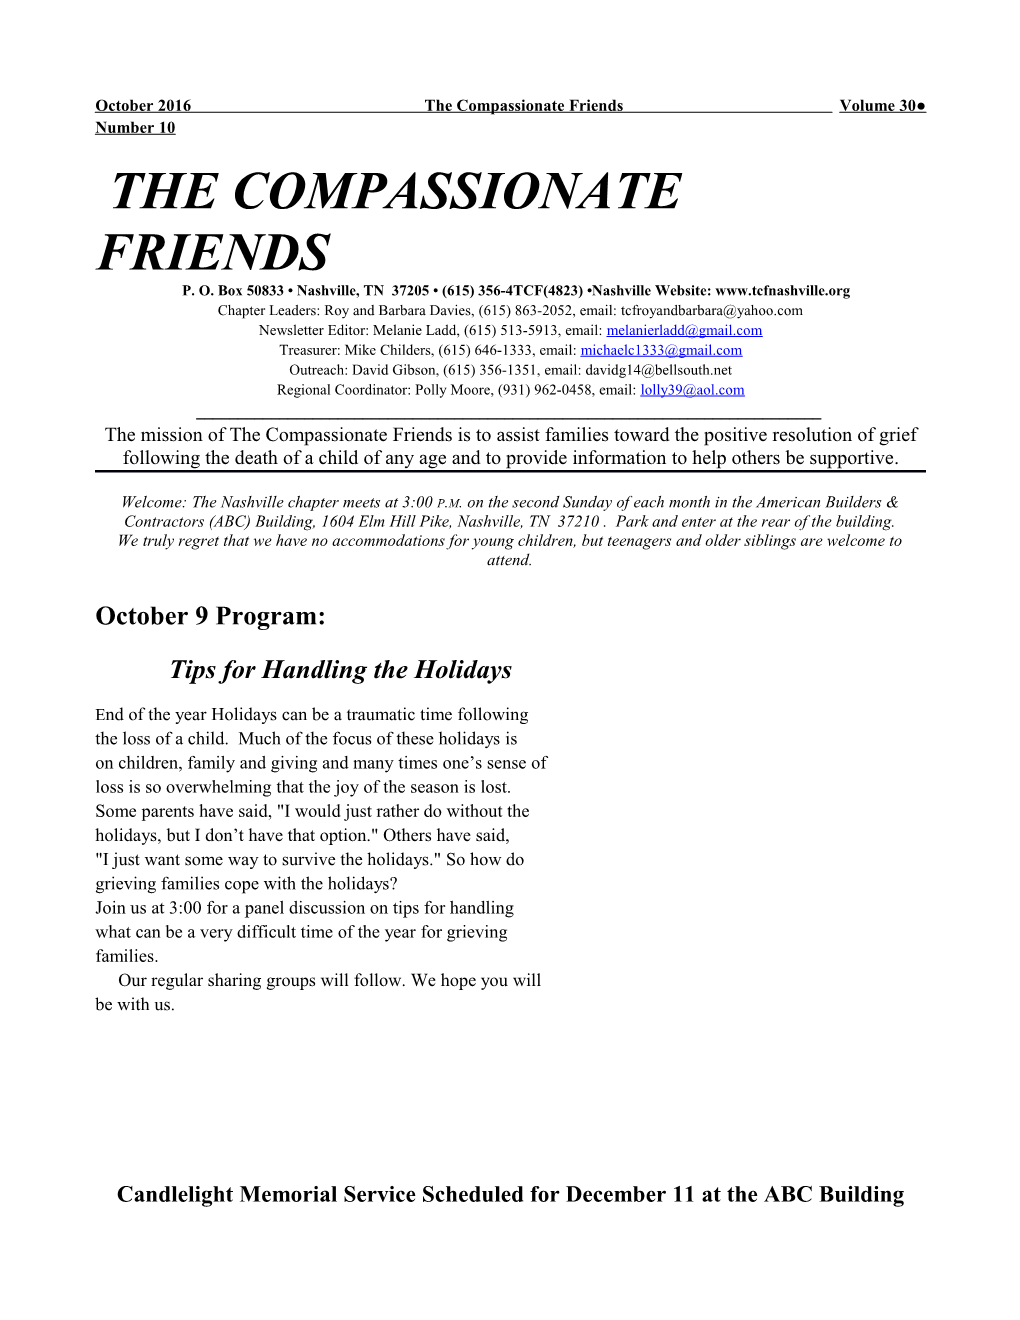 October 2016 the Compassionate Friends Volume 30 Number 10